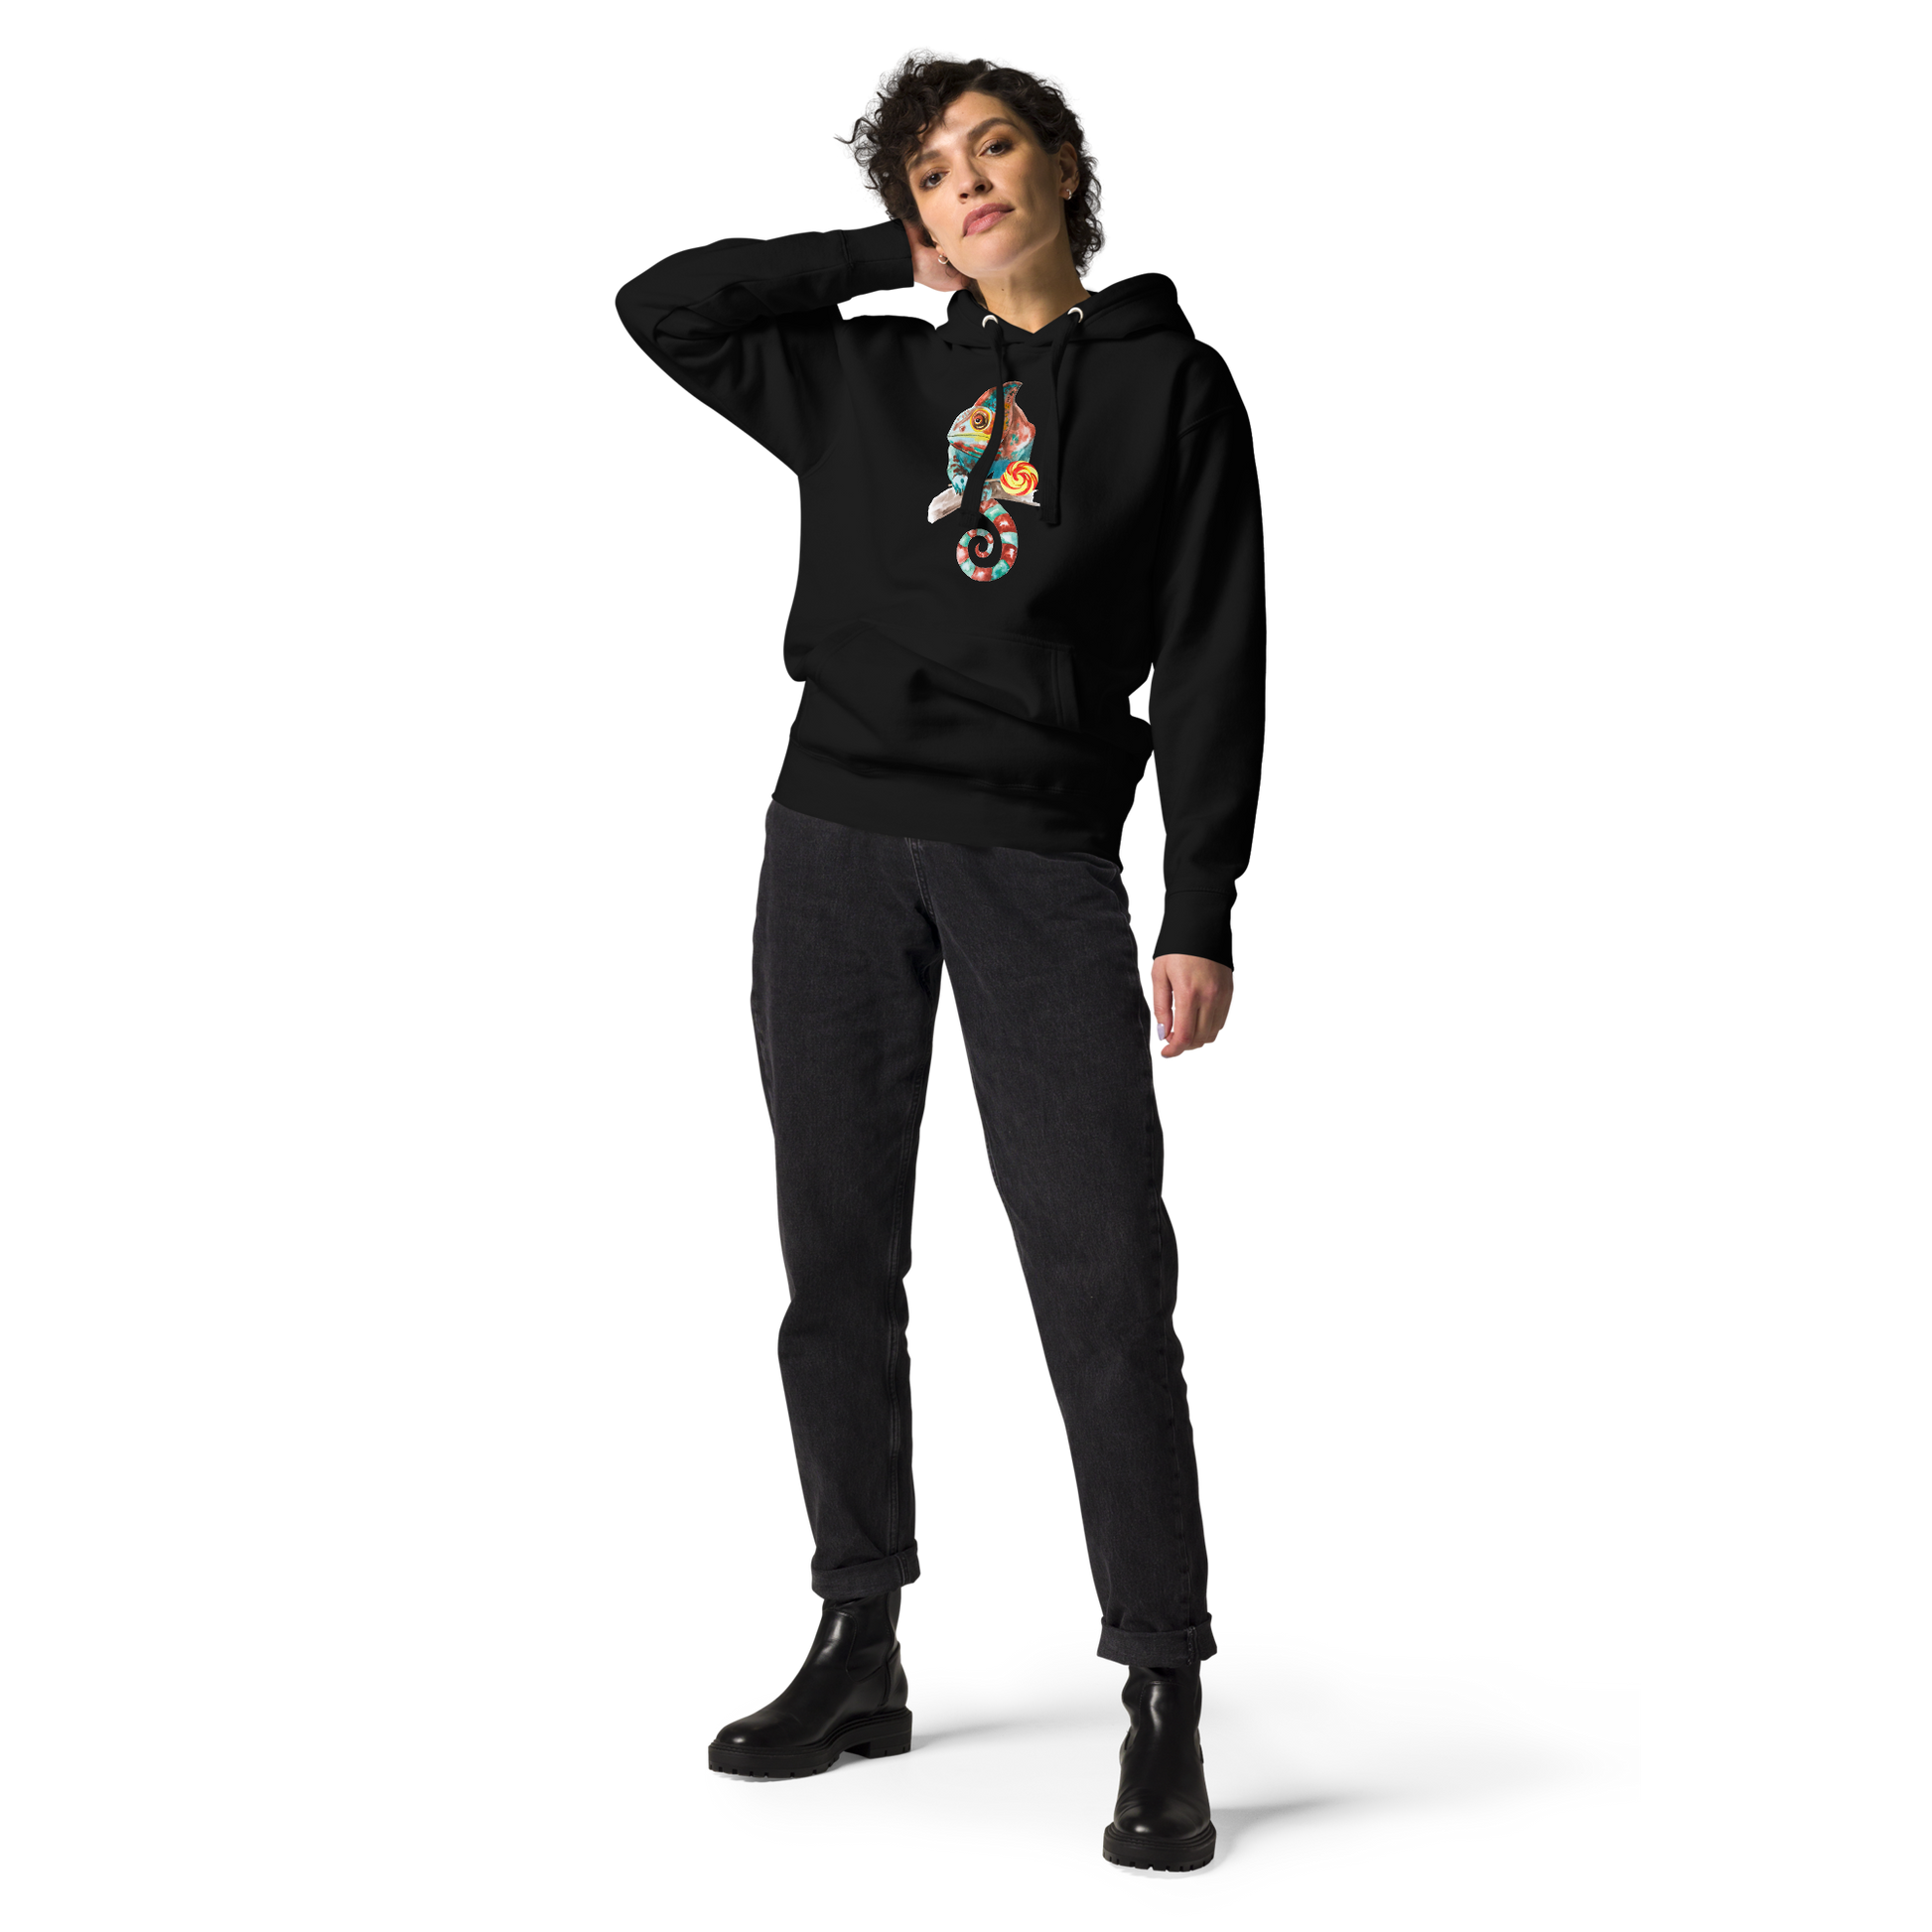 Woman wearing a Black Premium Chameleon Hoodie featuring a vibrant Chameleon With A Lollipop graphic on the chest - Cool Graphic Chameleon Hoodies - Boozy Fox